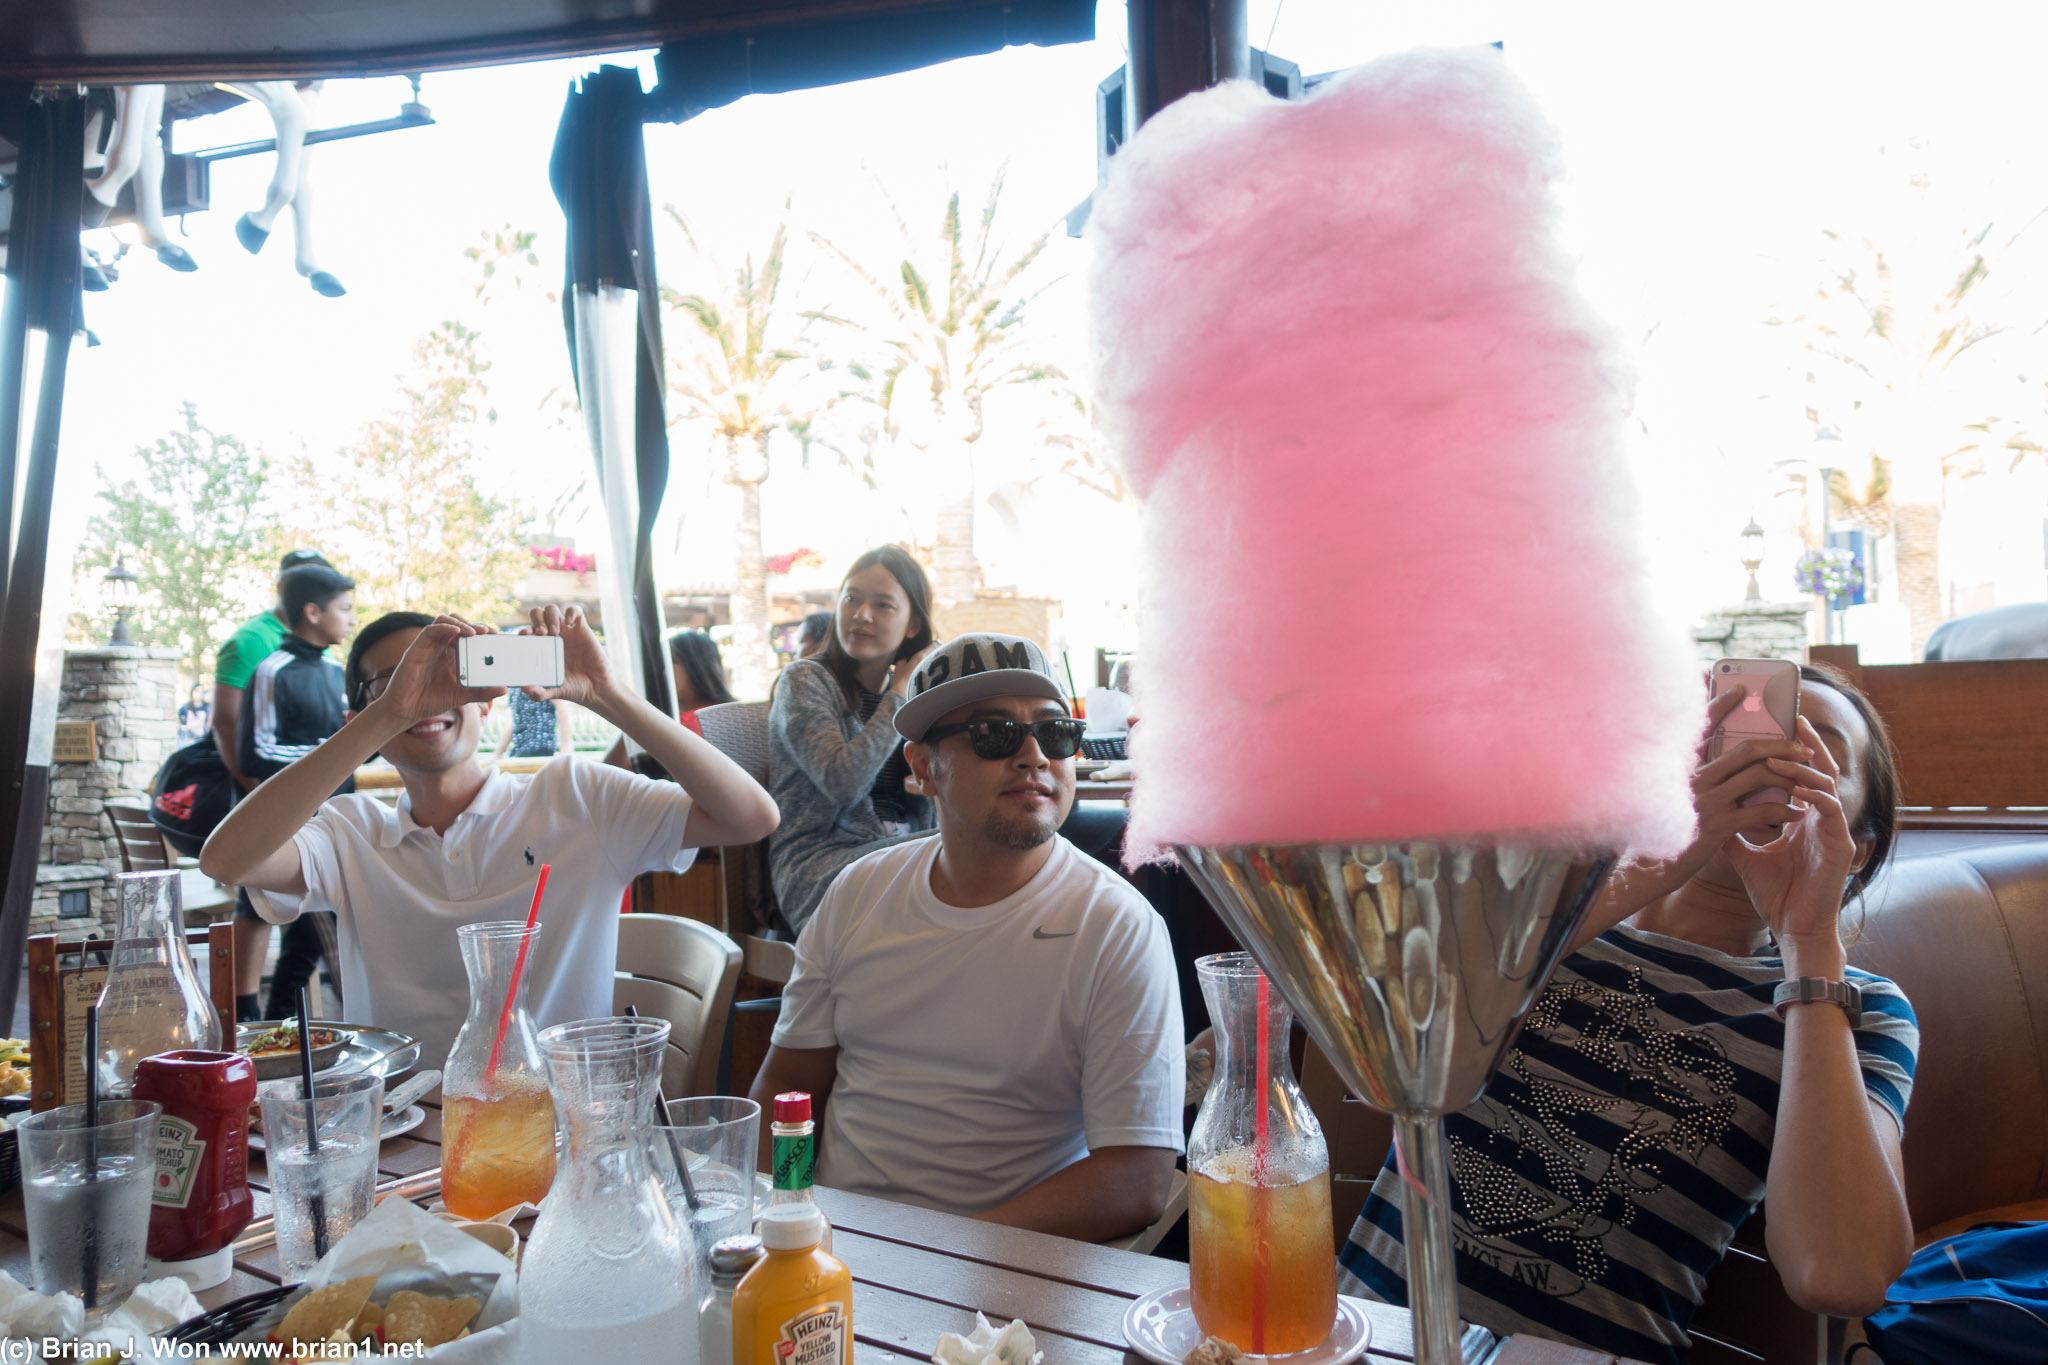 The famous 3 feet tall cotton candy.